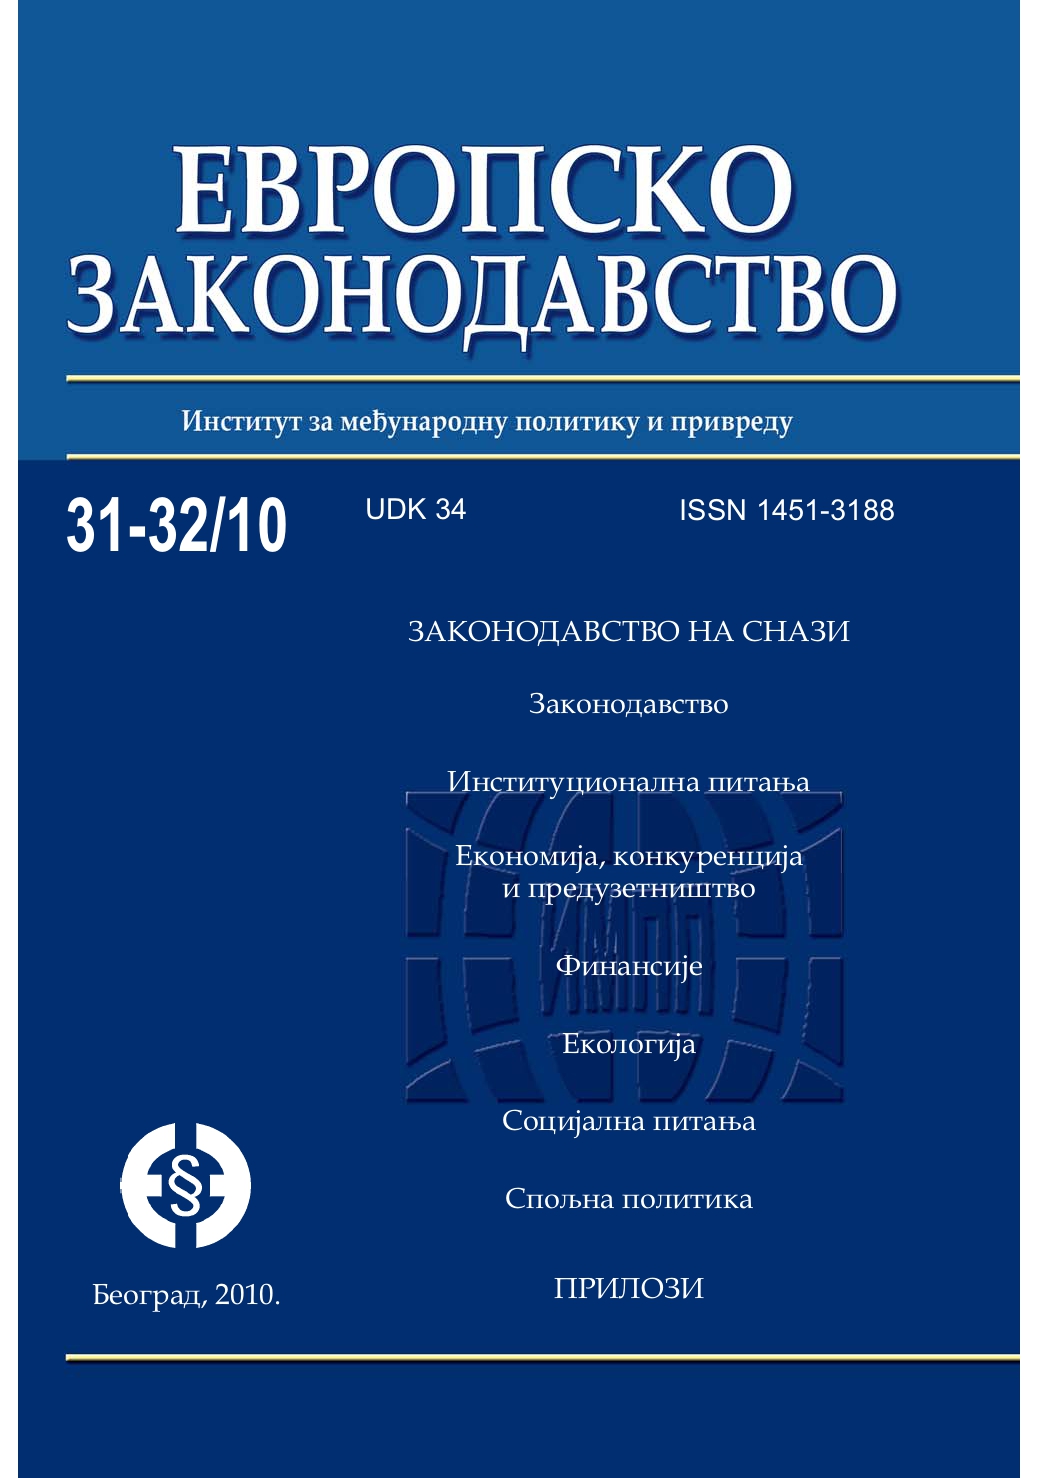 Regulation of the European Parliament and of the Council establishing a European Small Claims Procedure (No. 861/2007 of 11 July 2007) Cover Image